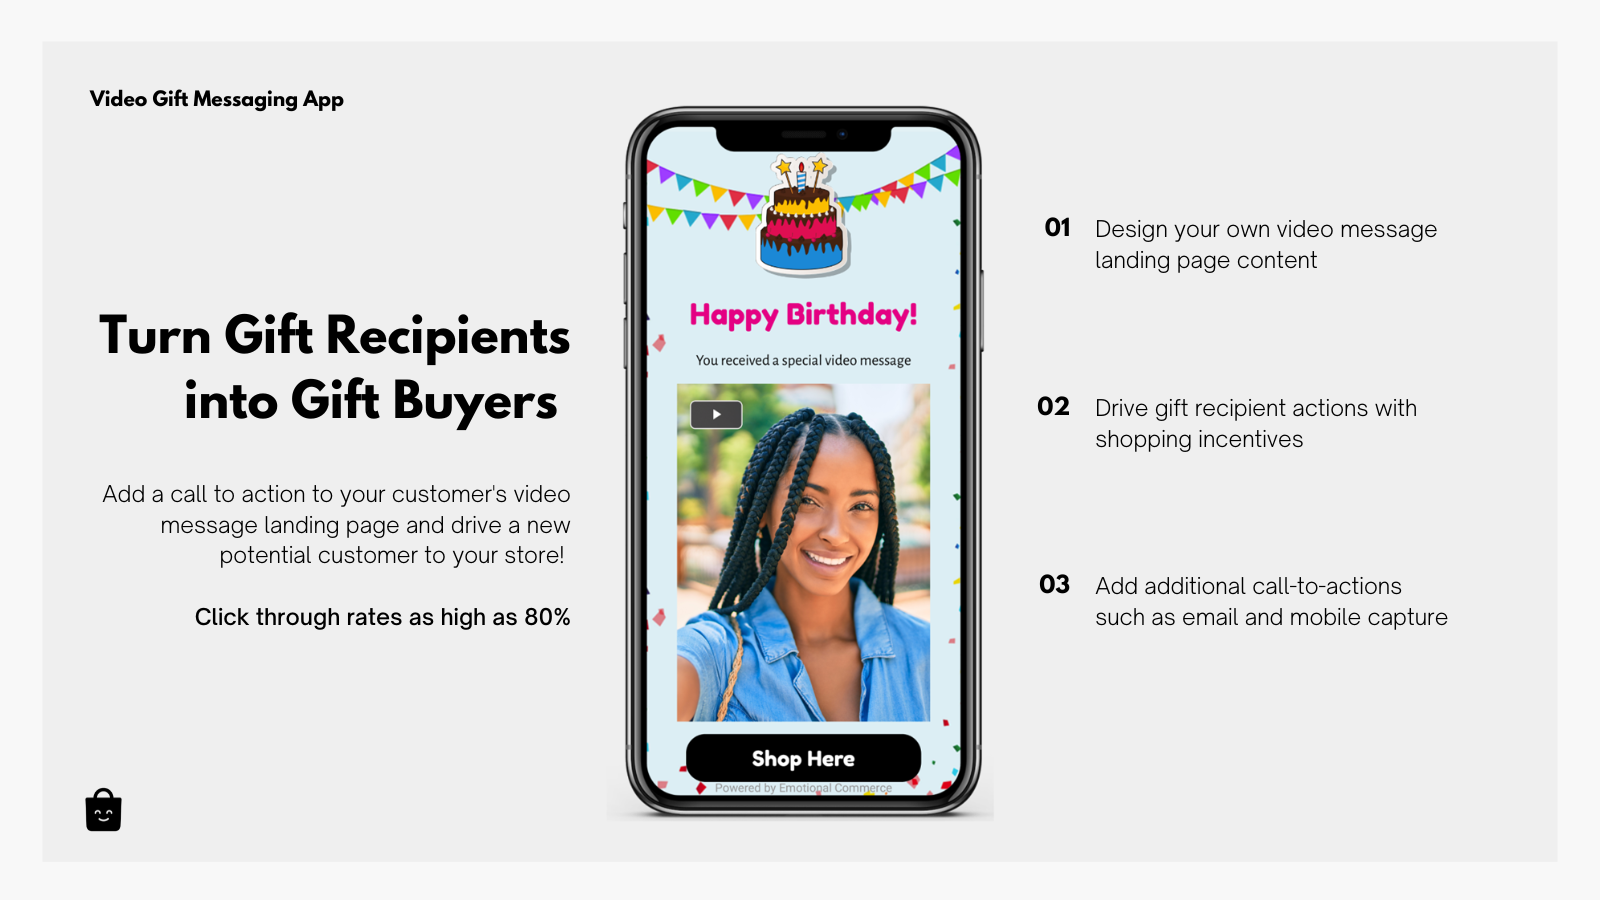 Turn Gift Recipients into Gift Purchasers